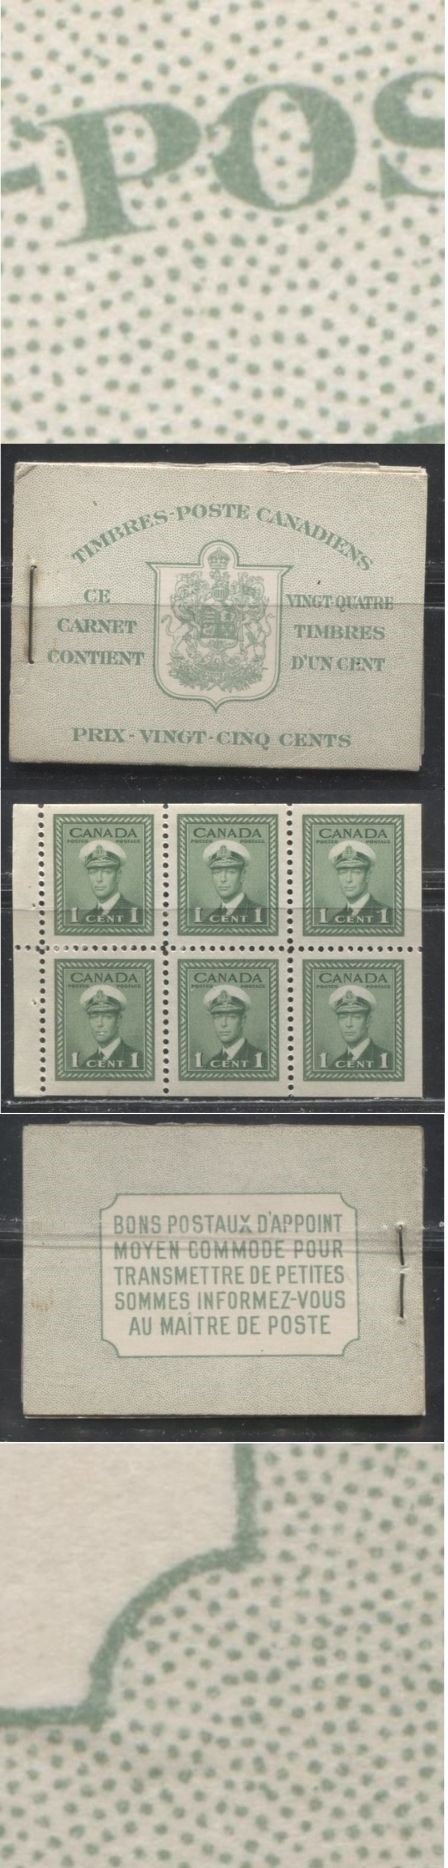 Lot 243 Canada #BK32d 1942-1949 War Issue, Complete 25¢ French Booklet, 4 Panes of 1c Green, Ribbed Vertical Wove Paper, Harris Front Cover Type IIk, Back Cover Type Div, 7c & 6c Airmail Rates Page